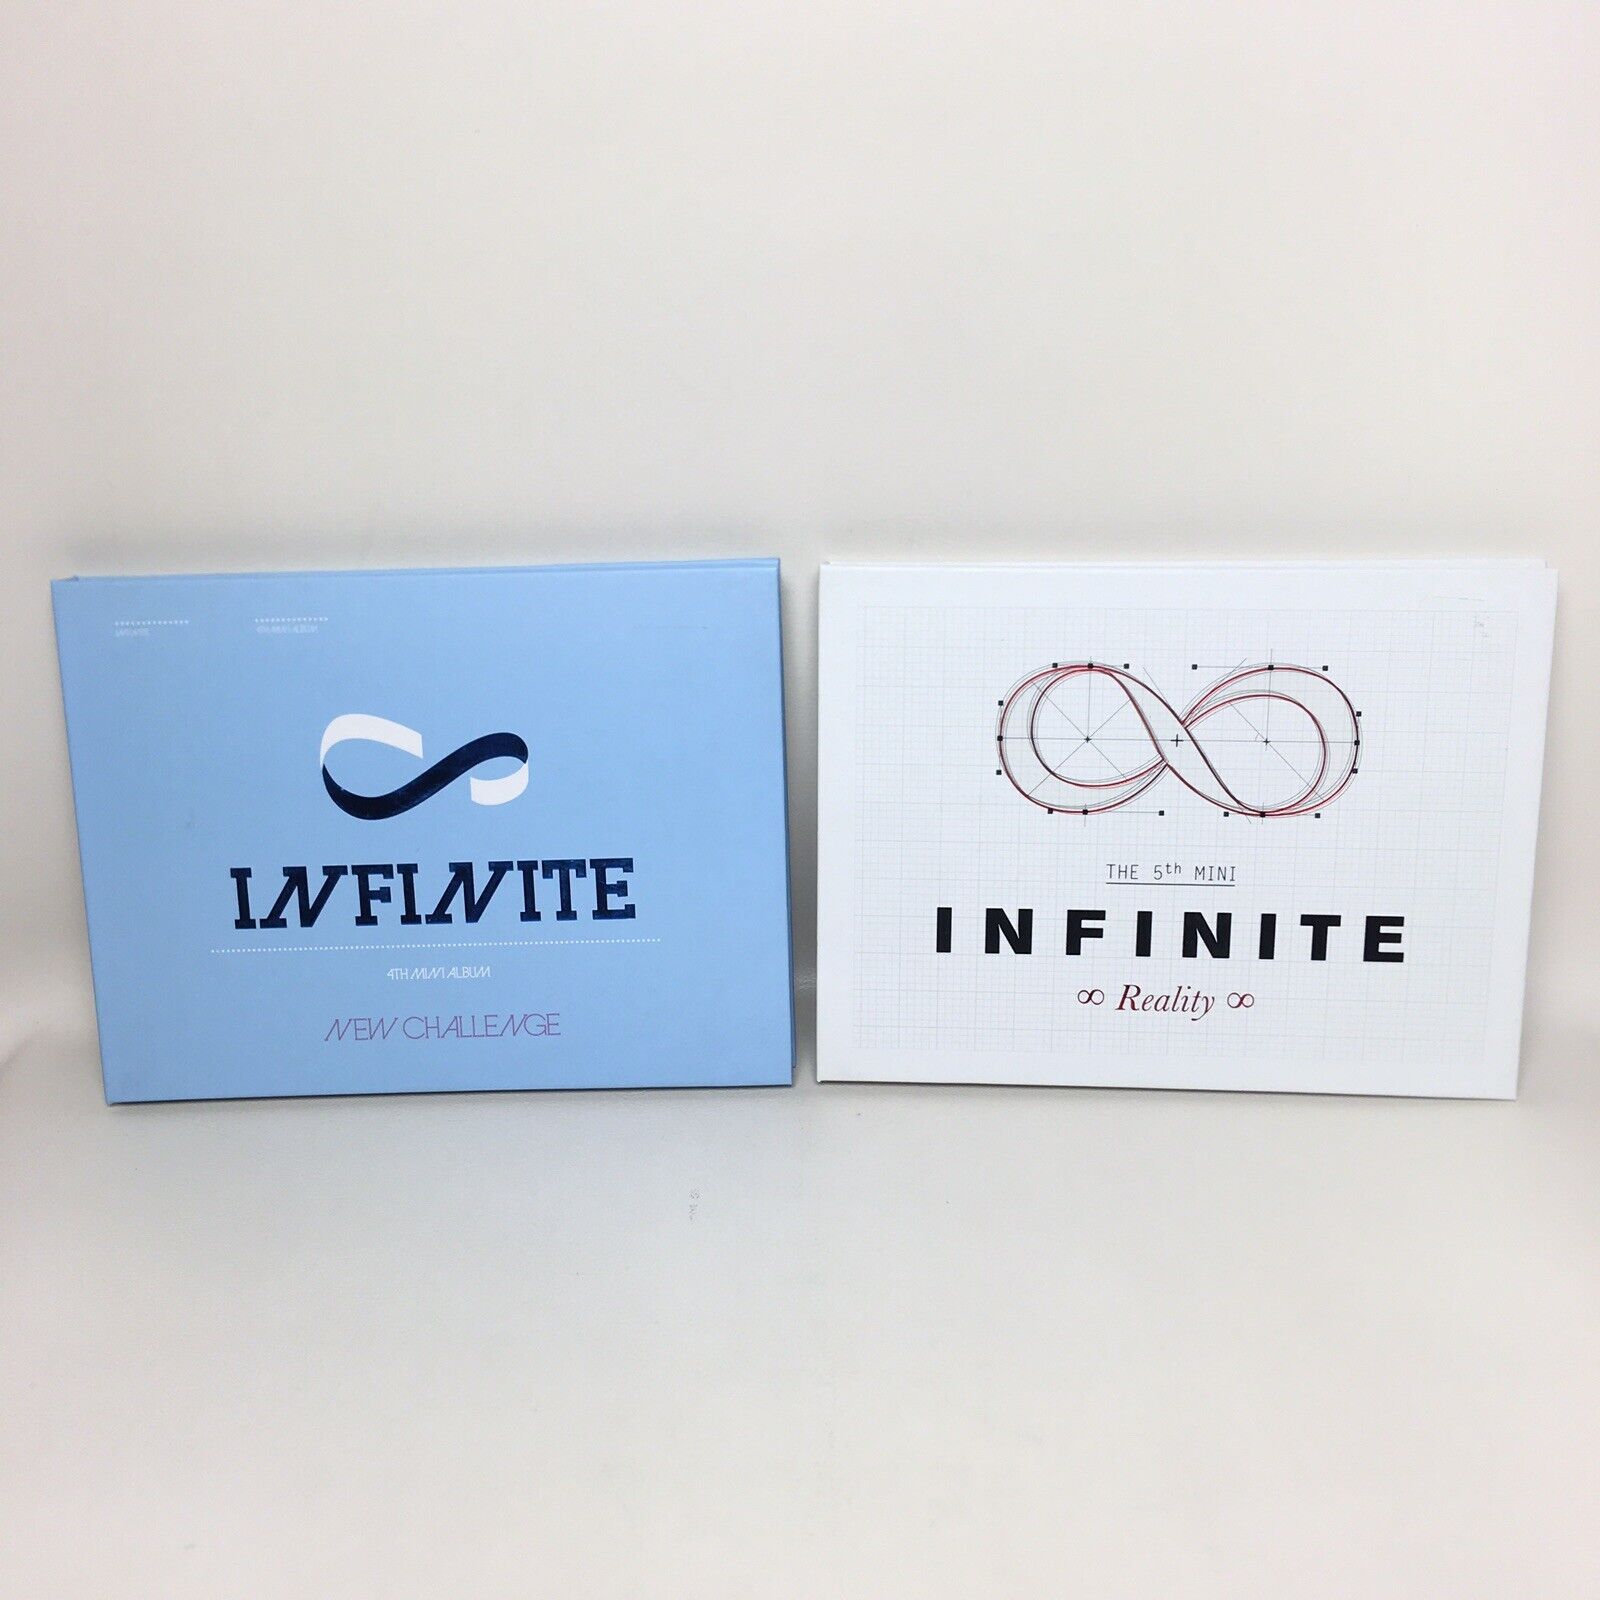 INFINITE The 4th Mini NEW CHALLENGE & The 5th Mini REALITY Cds Lot Of 2